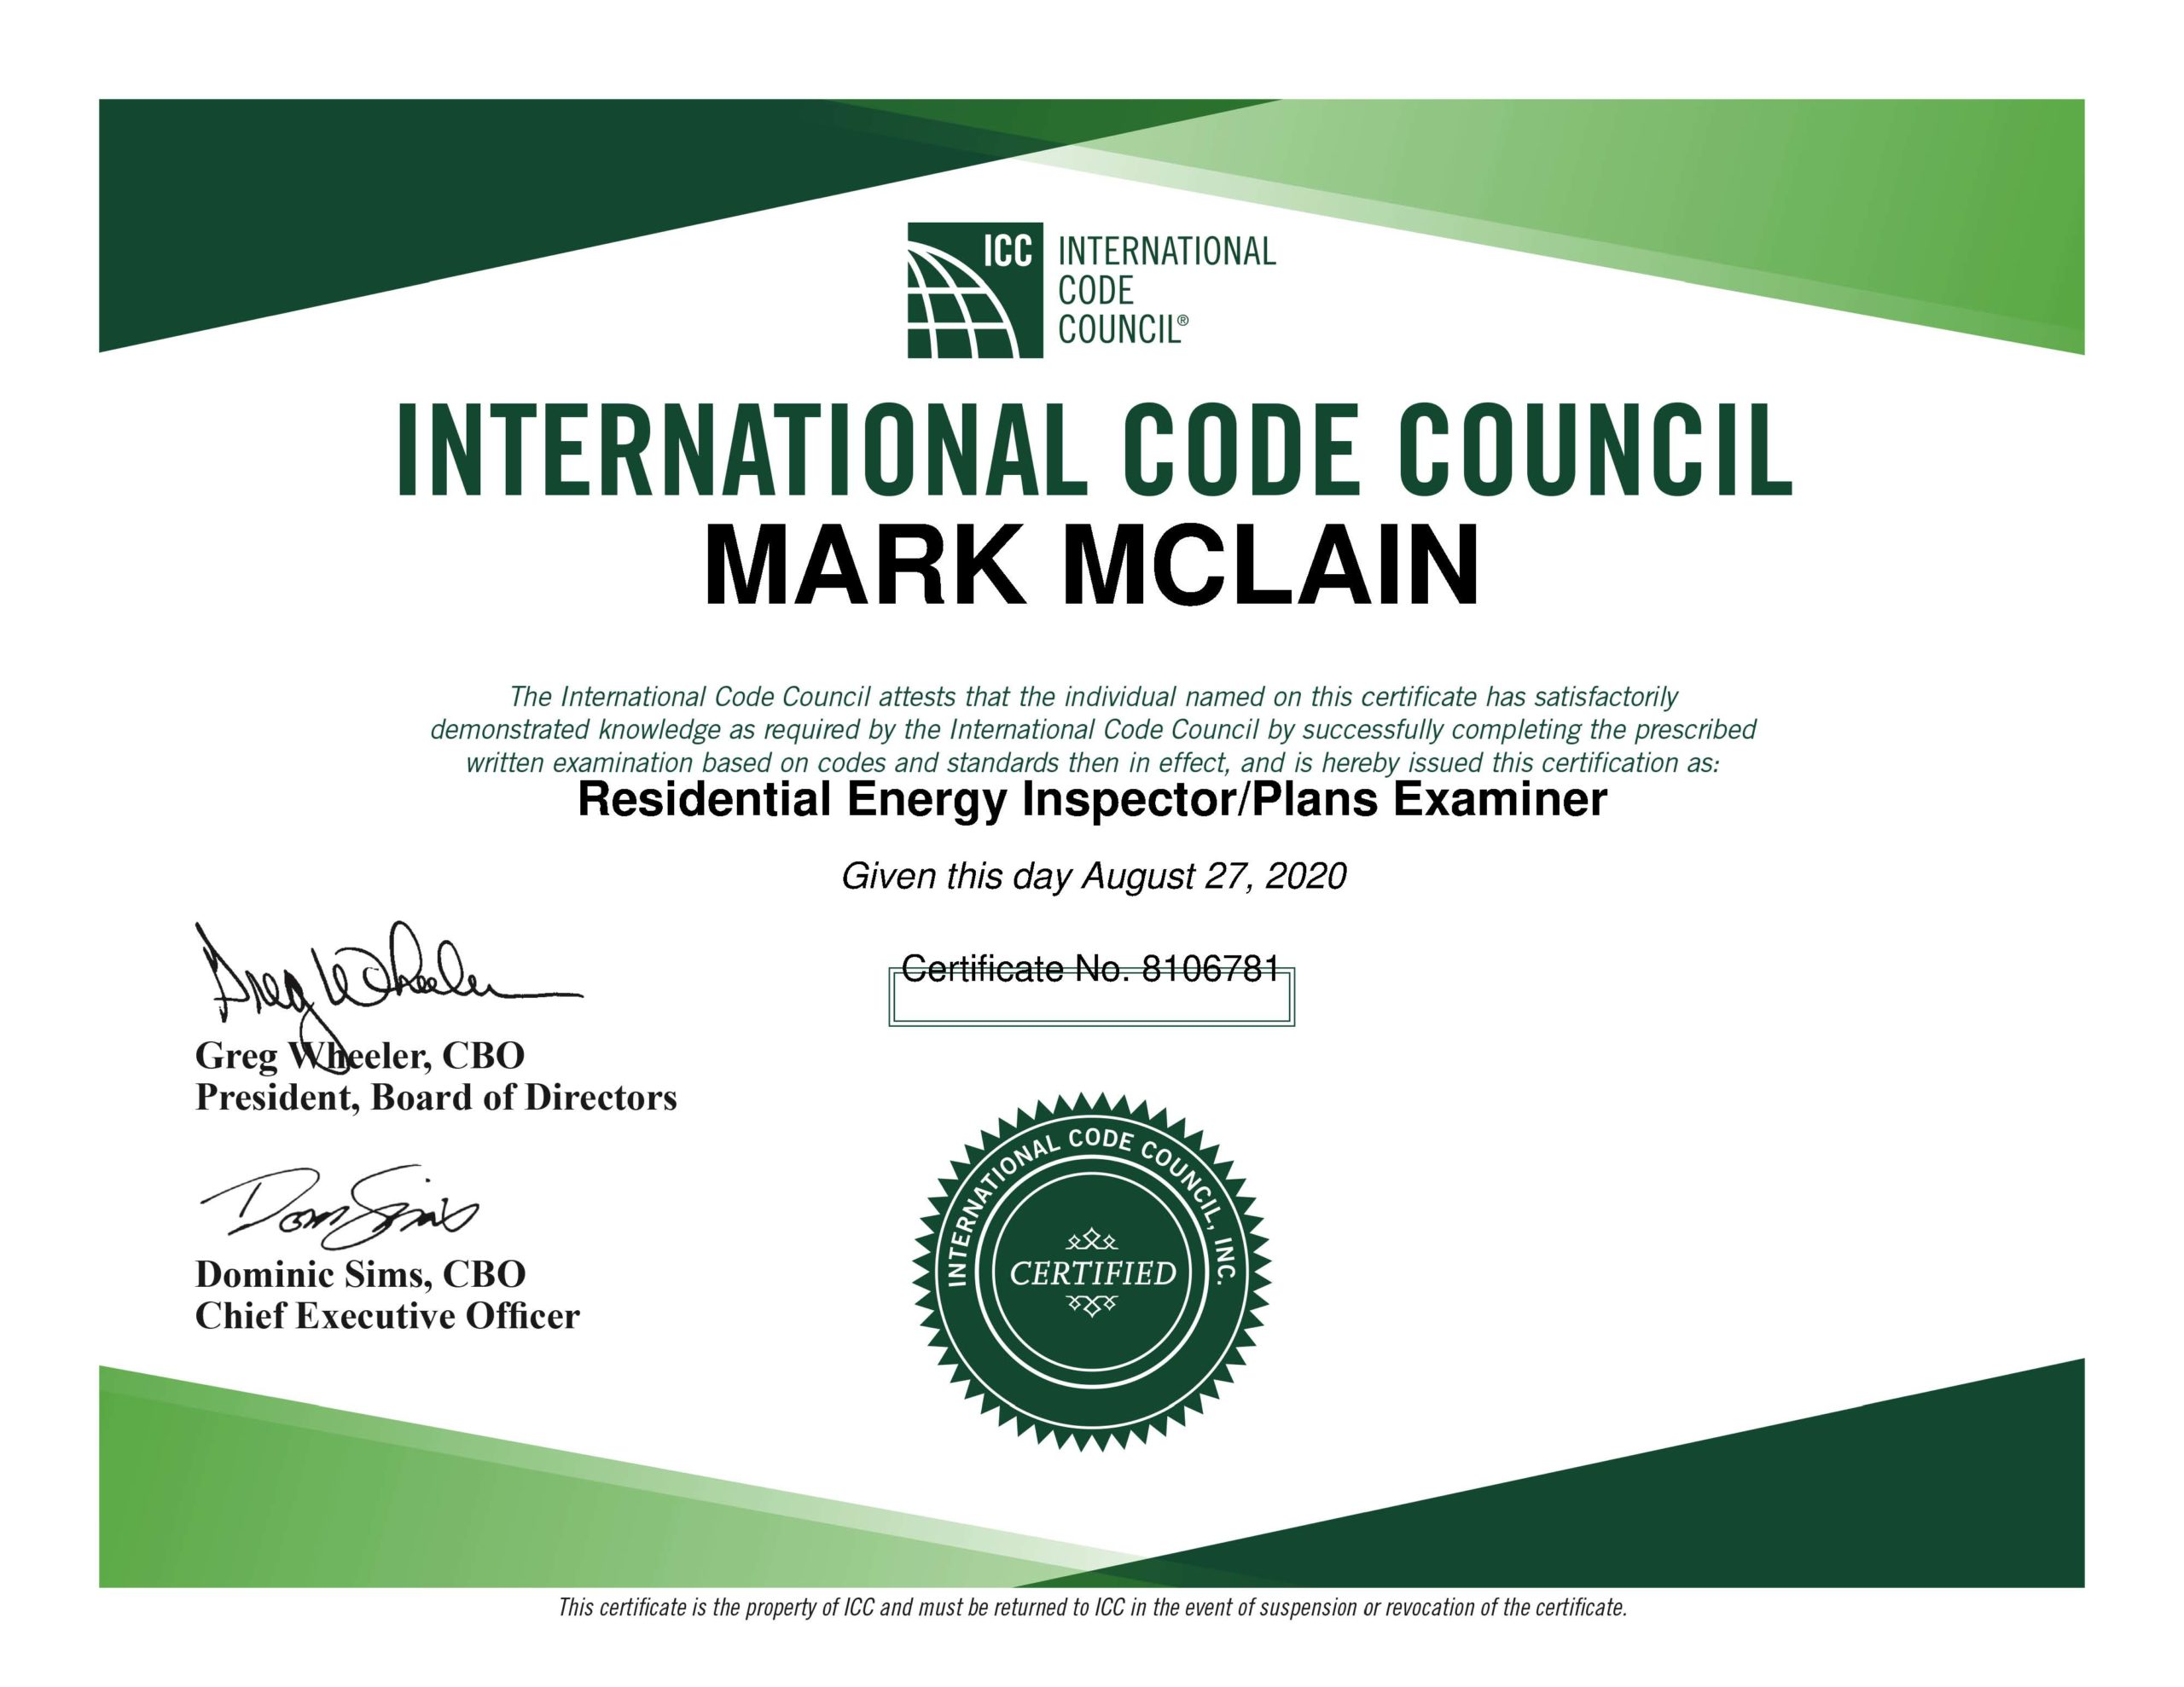 ICC Residential Energy Inspector/Plans Examiner